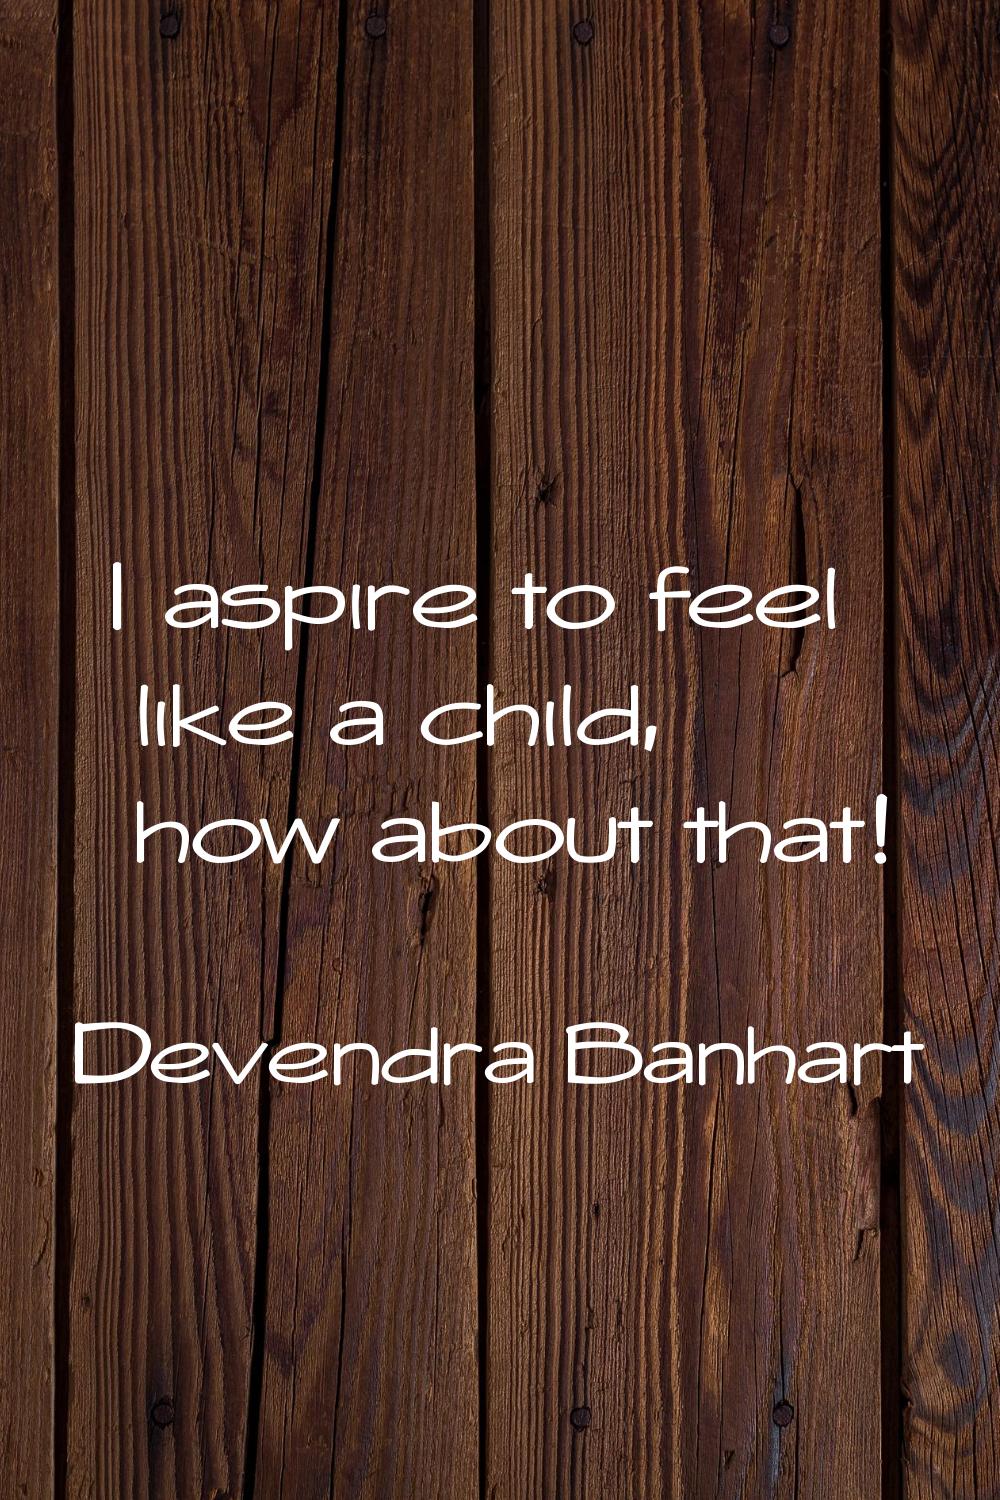 I aspire to feel like a child, how about that!